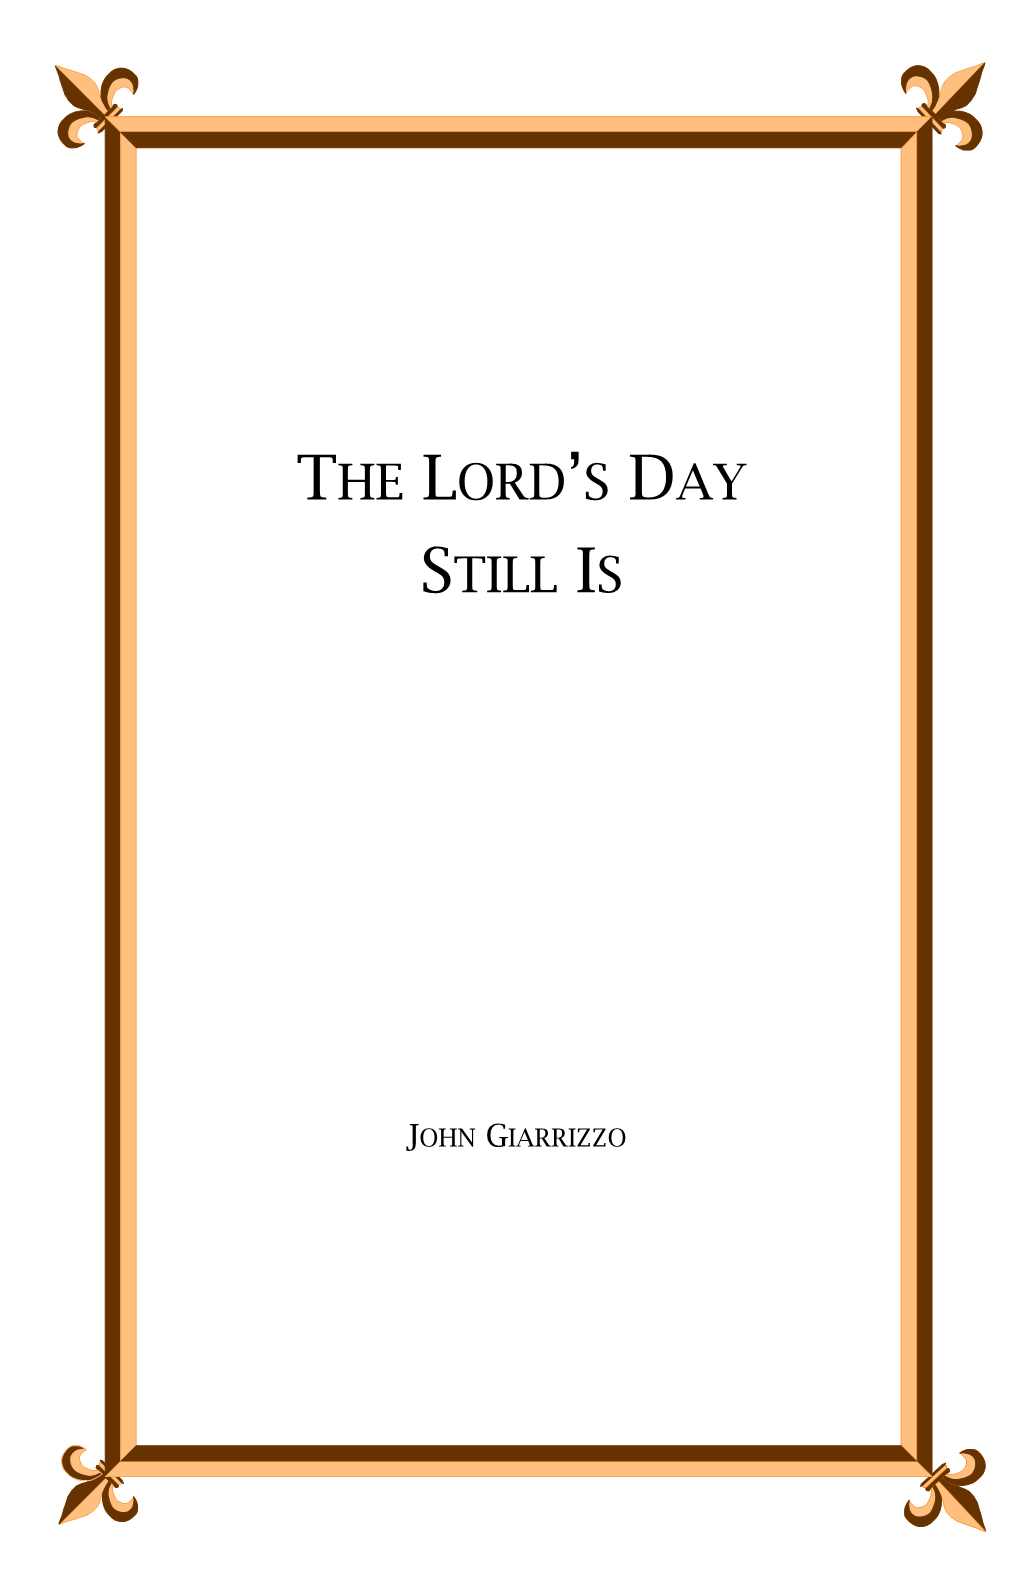 The Lord's Day Still Is